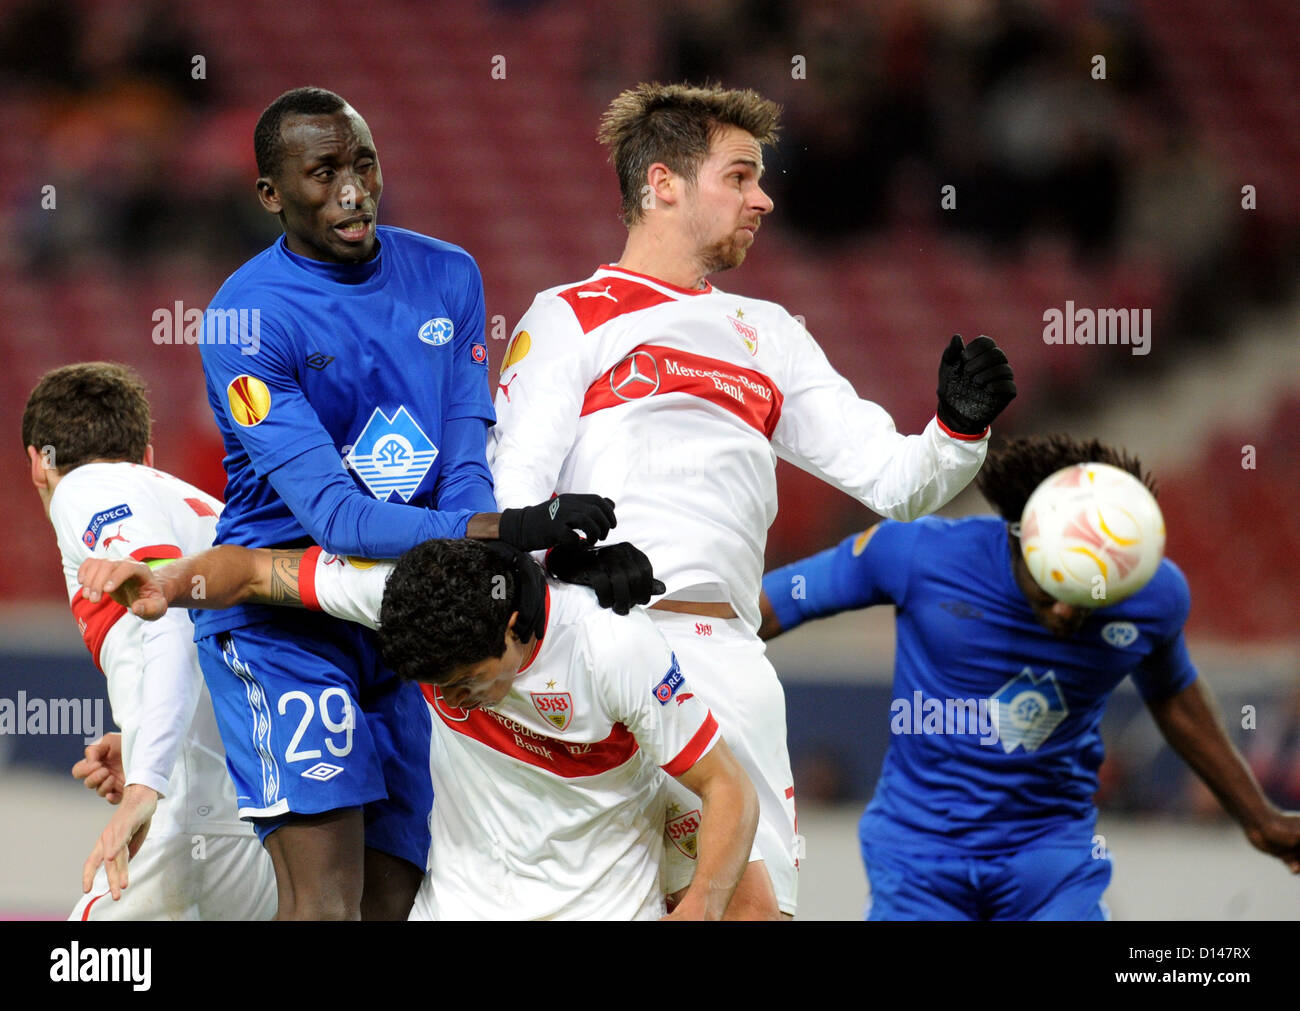 Stuttgarts Martin Harnik (C) vies with Daniel Chima (R) and Pape Pate Diouf (L) of Molde FK during the Europa League group E soccer match VfB Stuttgart vs. Molde FK at VfB Arena stadium in Stuttgart, Germany, 06 December 2012. Photo: Bernd Weißbrod / dpa Stock Photo